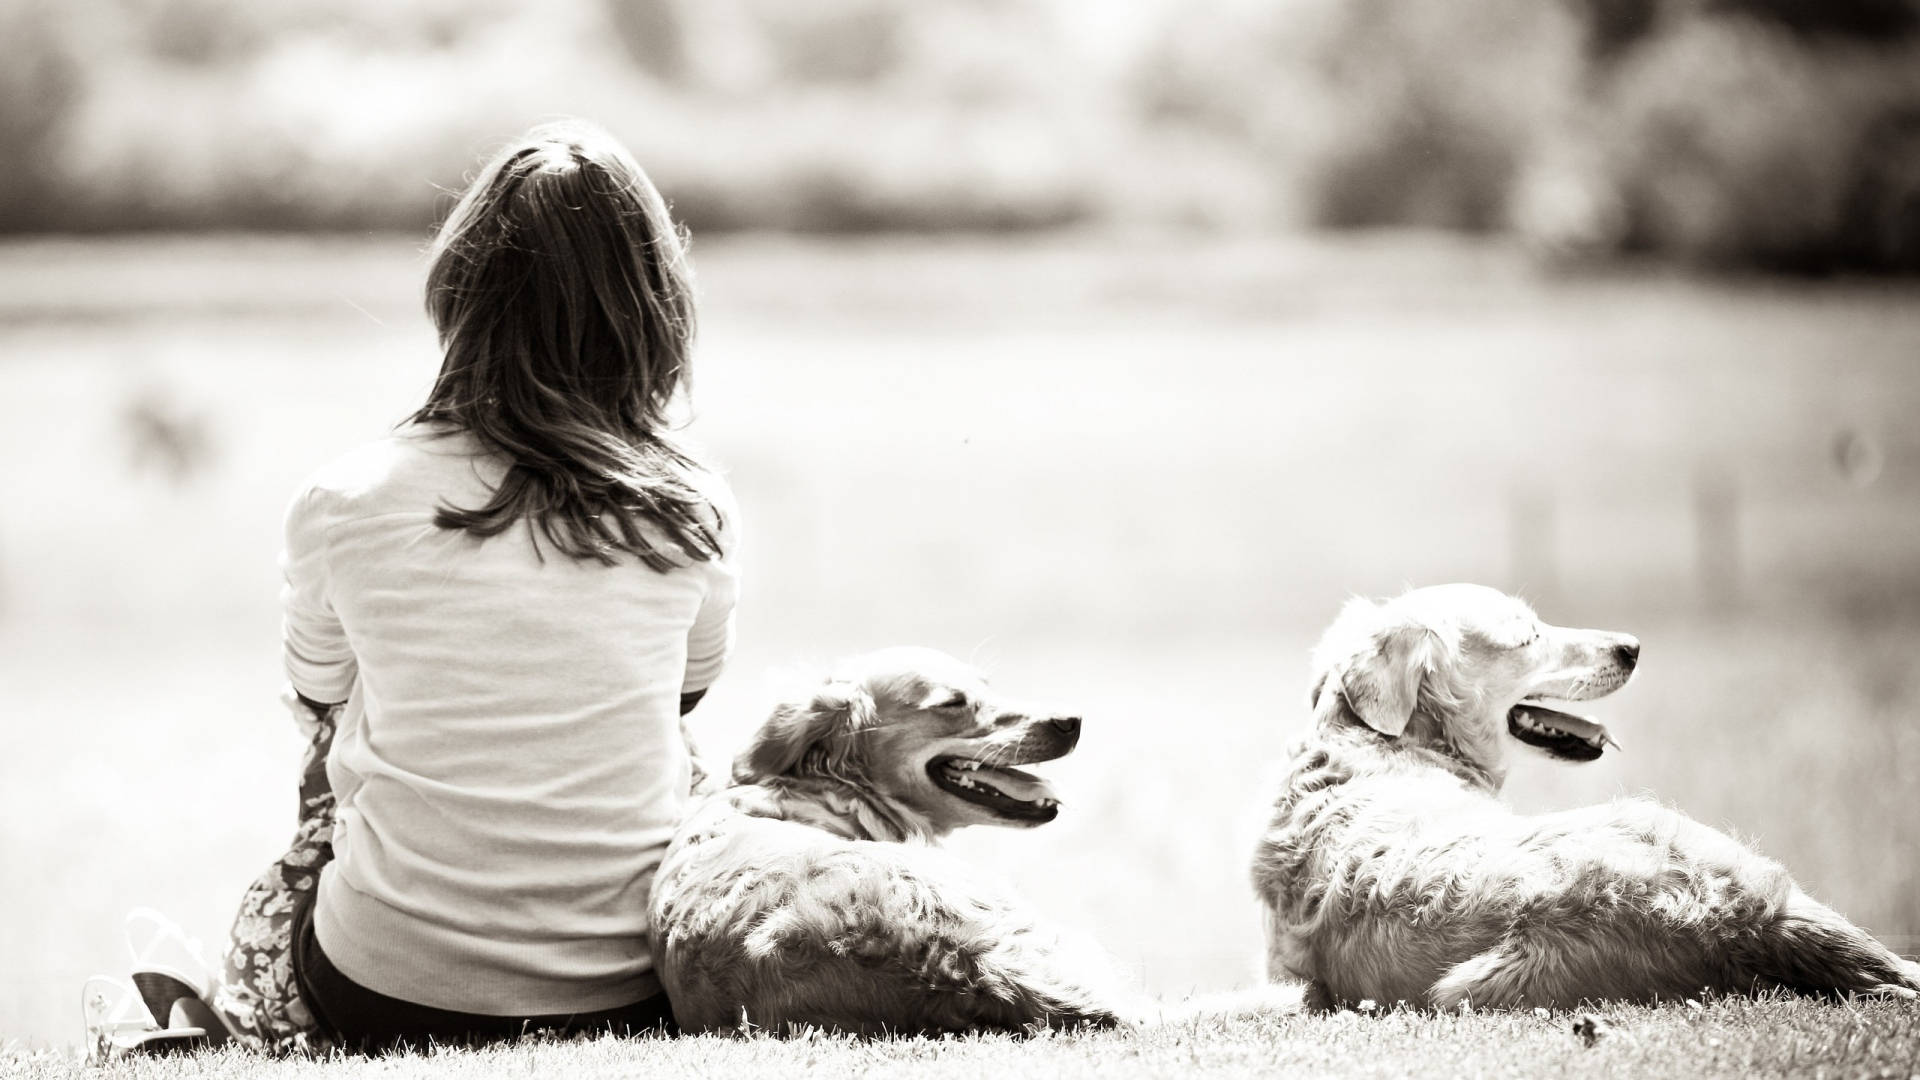 Monochrome Image Of A Dog And Girl Wallpaper